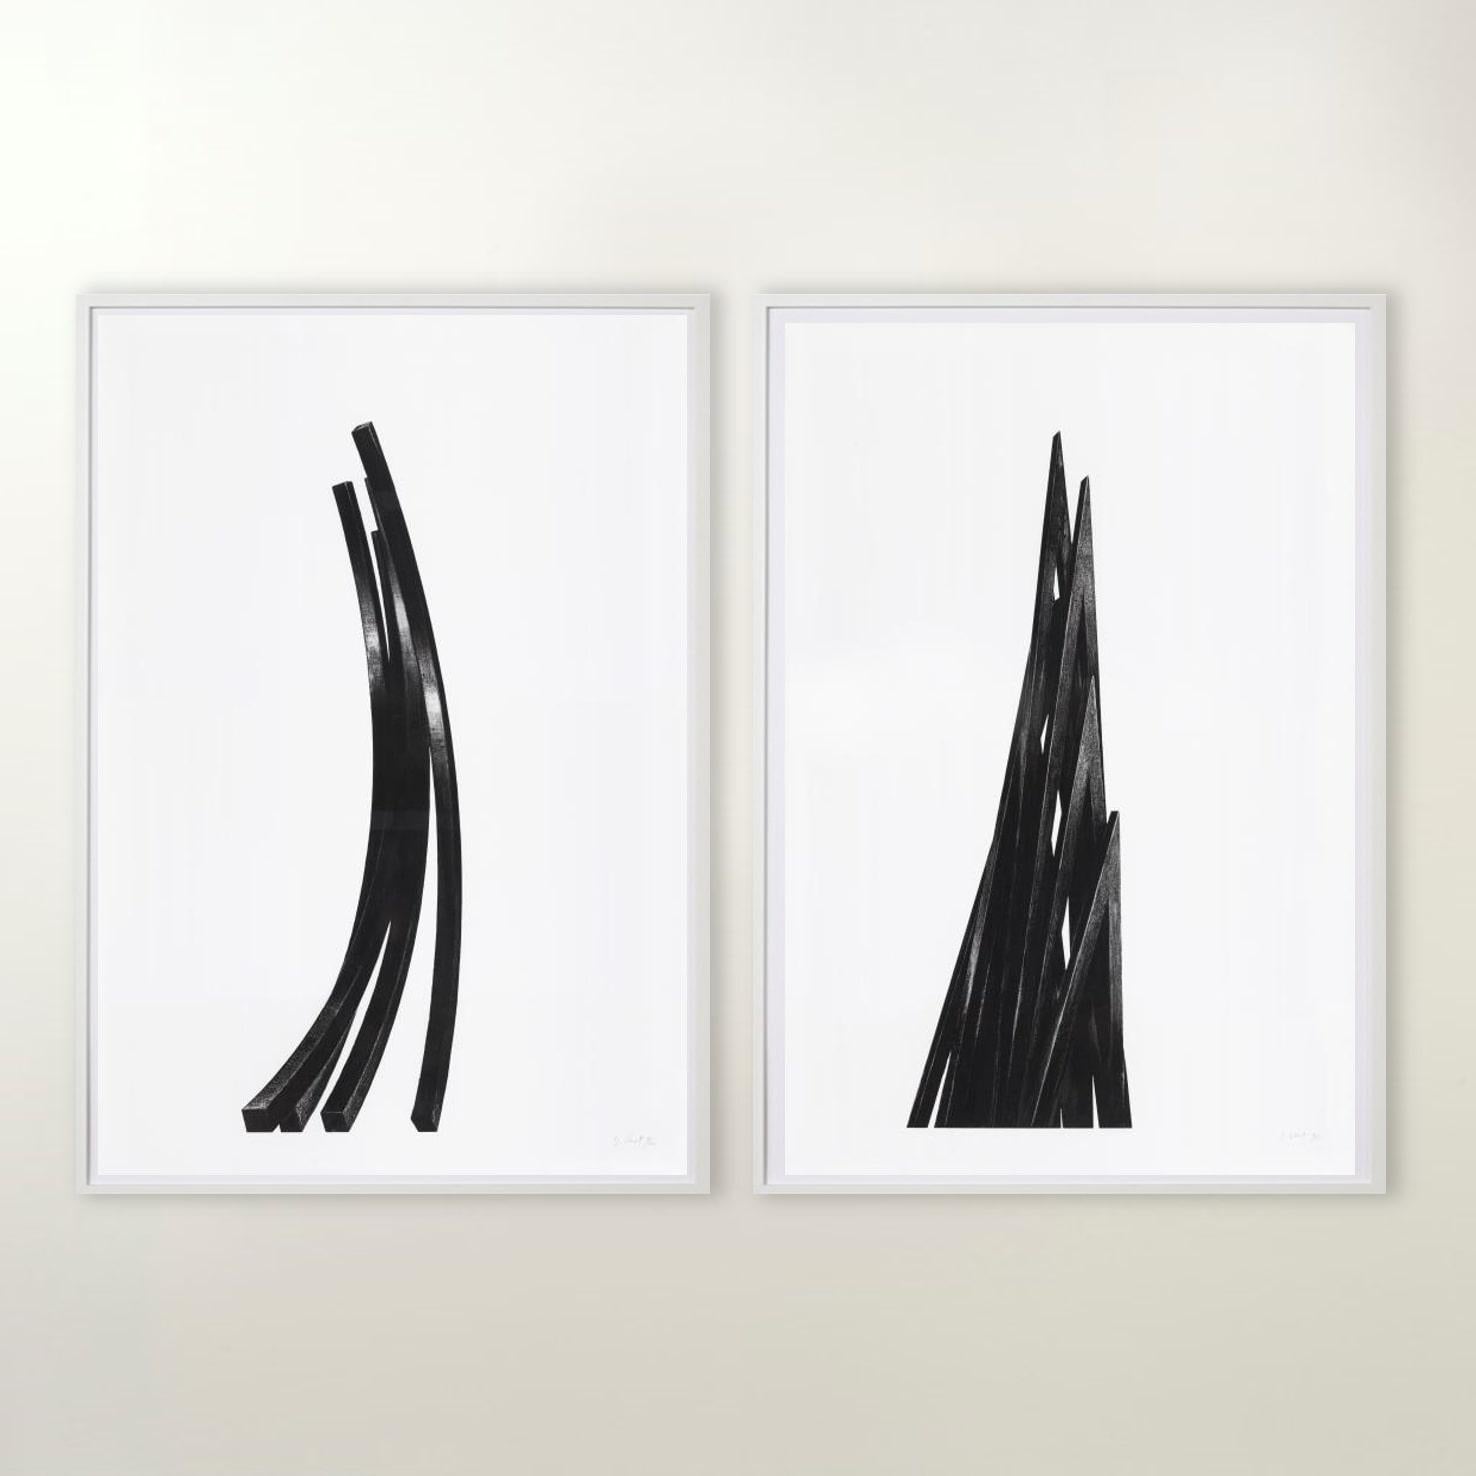 Arcs: Uneven Angles - Contemporary, 21st Century, Etching, Black, White, Edition